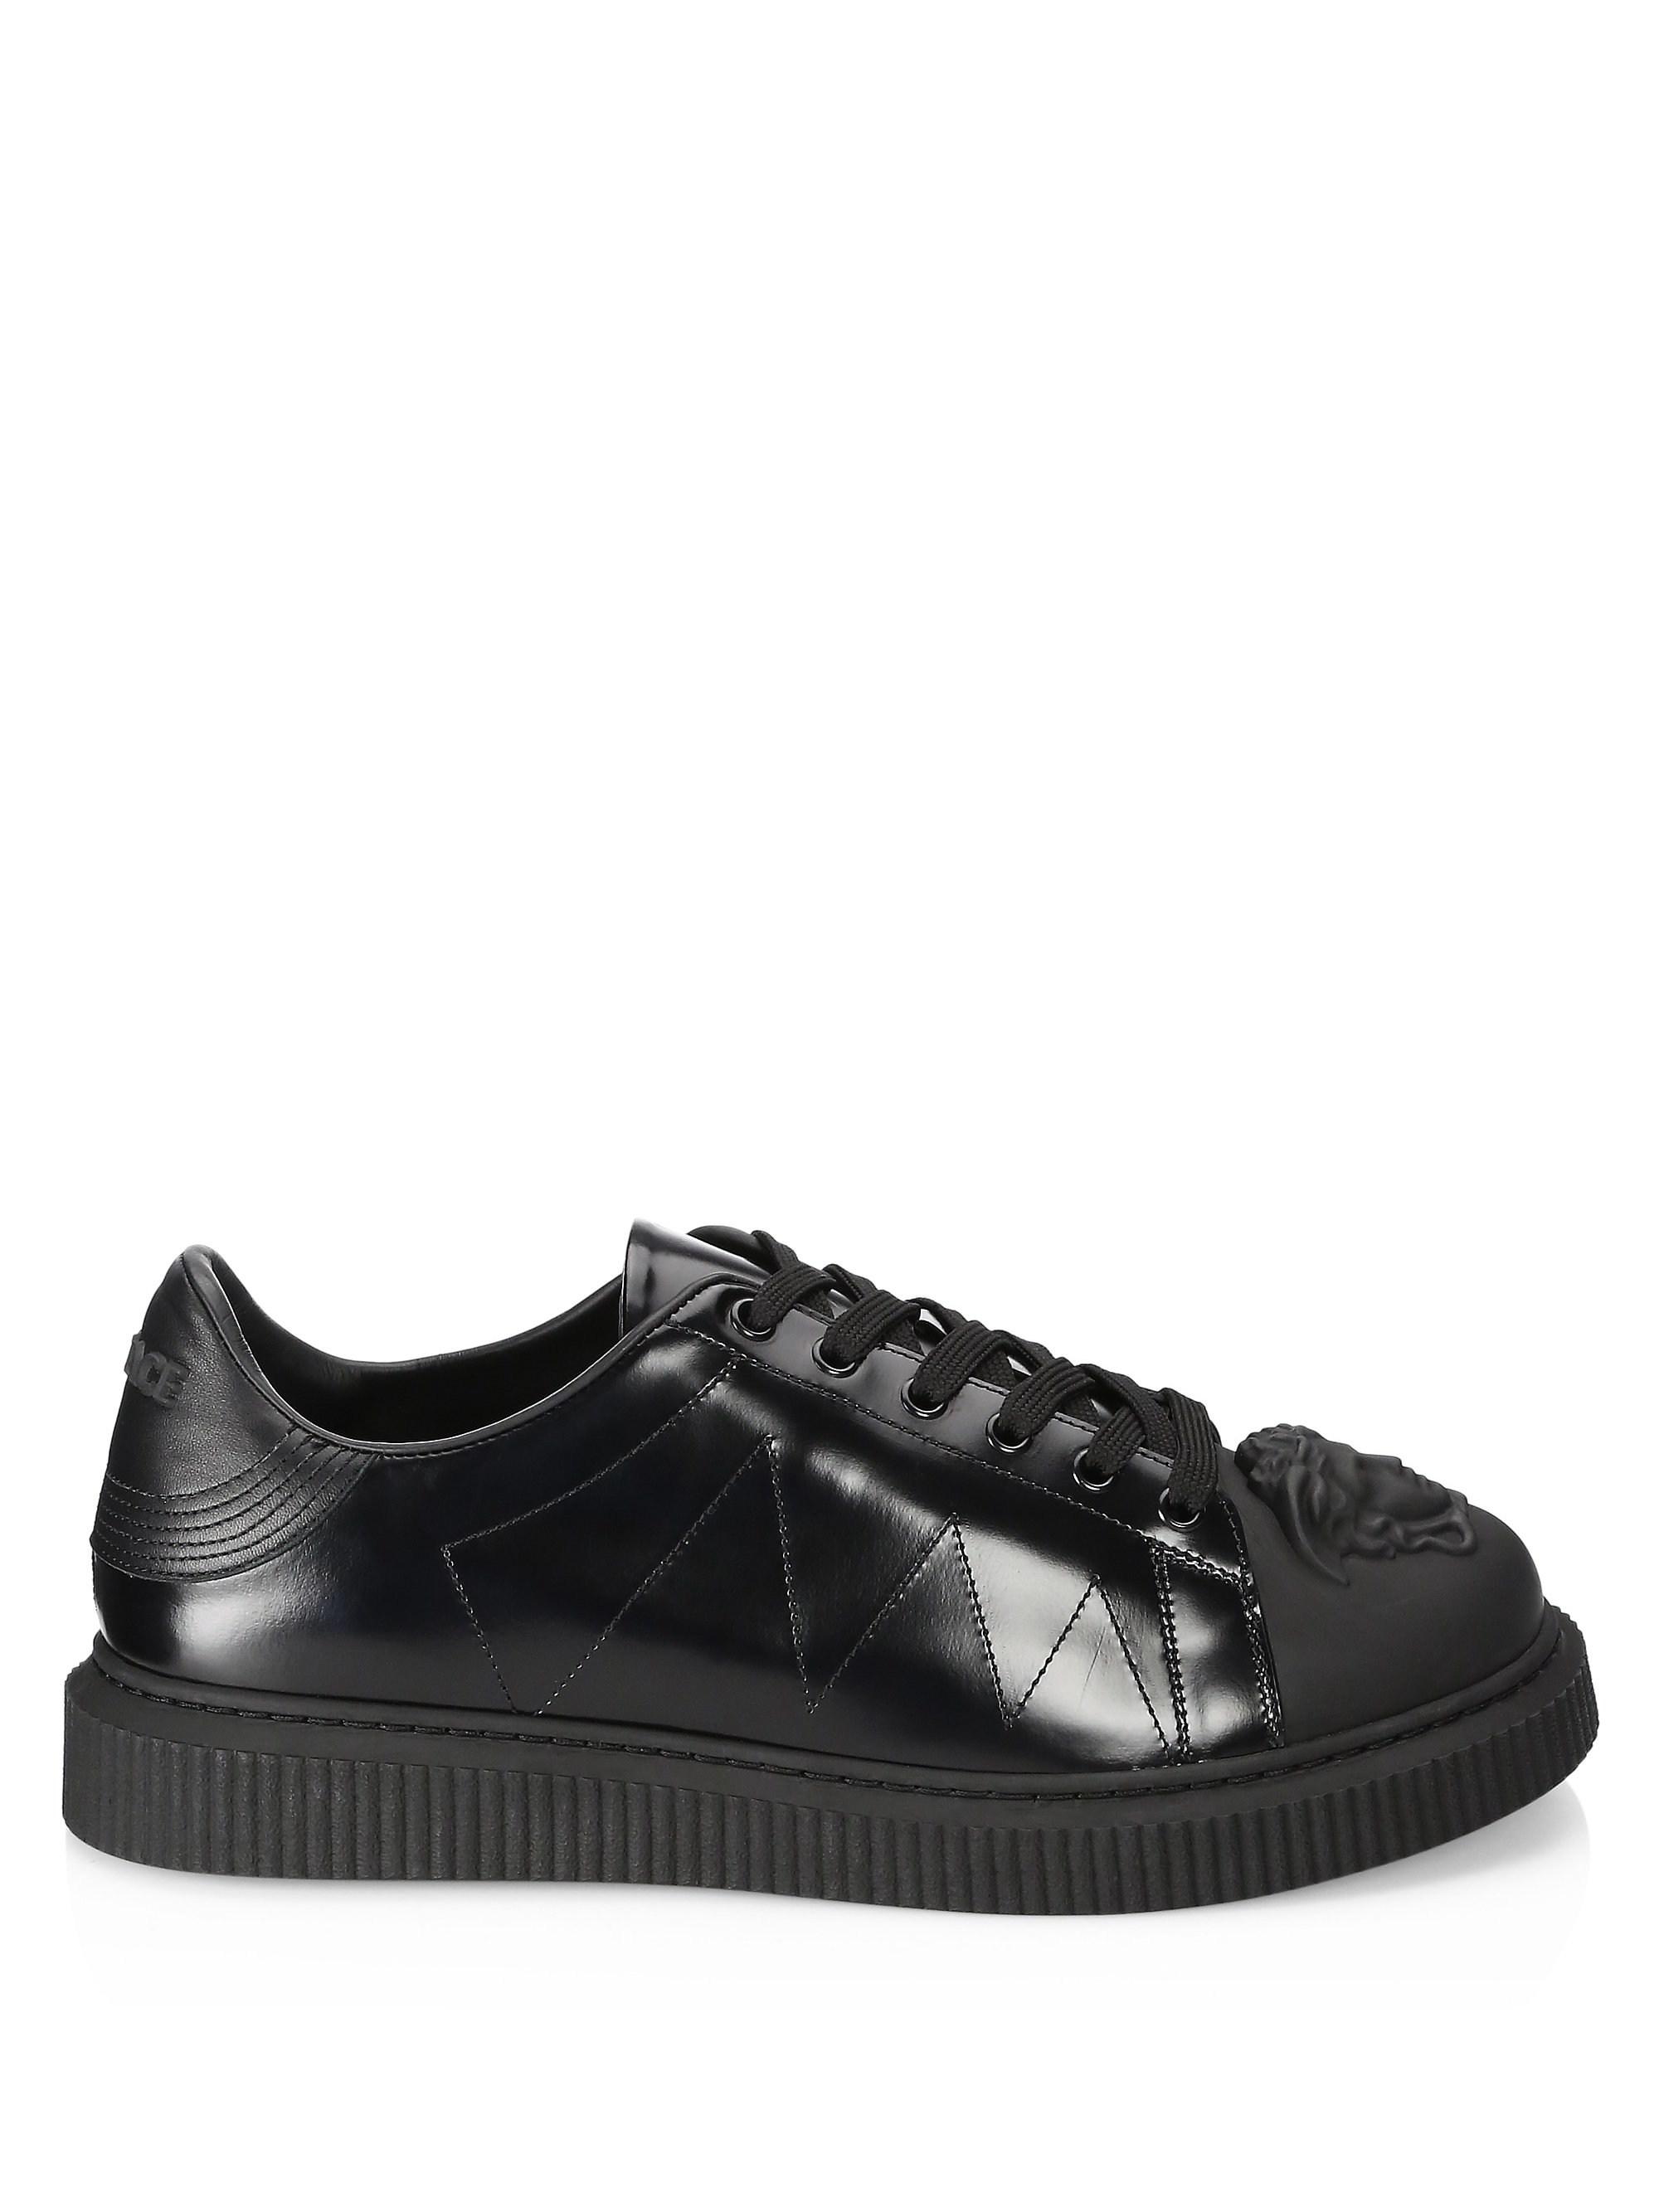 Versace Medusa Leather Nyx Sneakers in Black for Men - Lyst